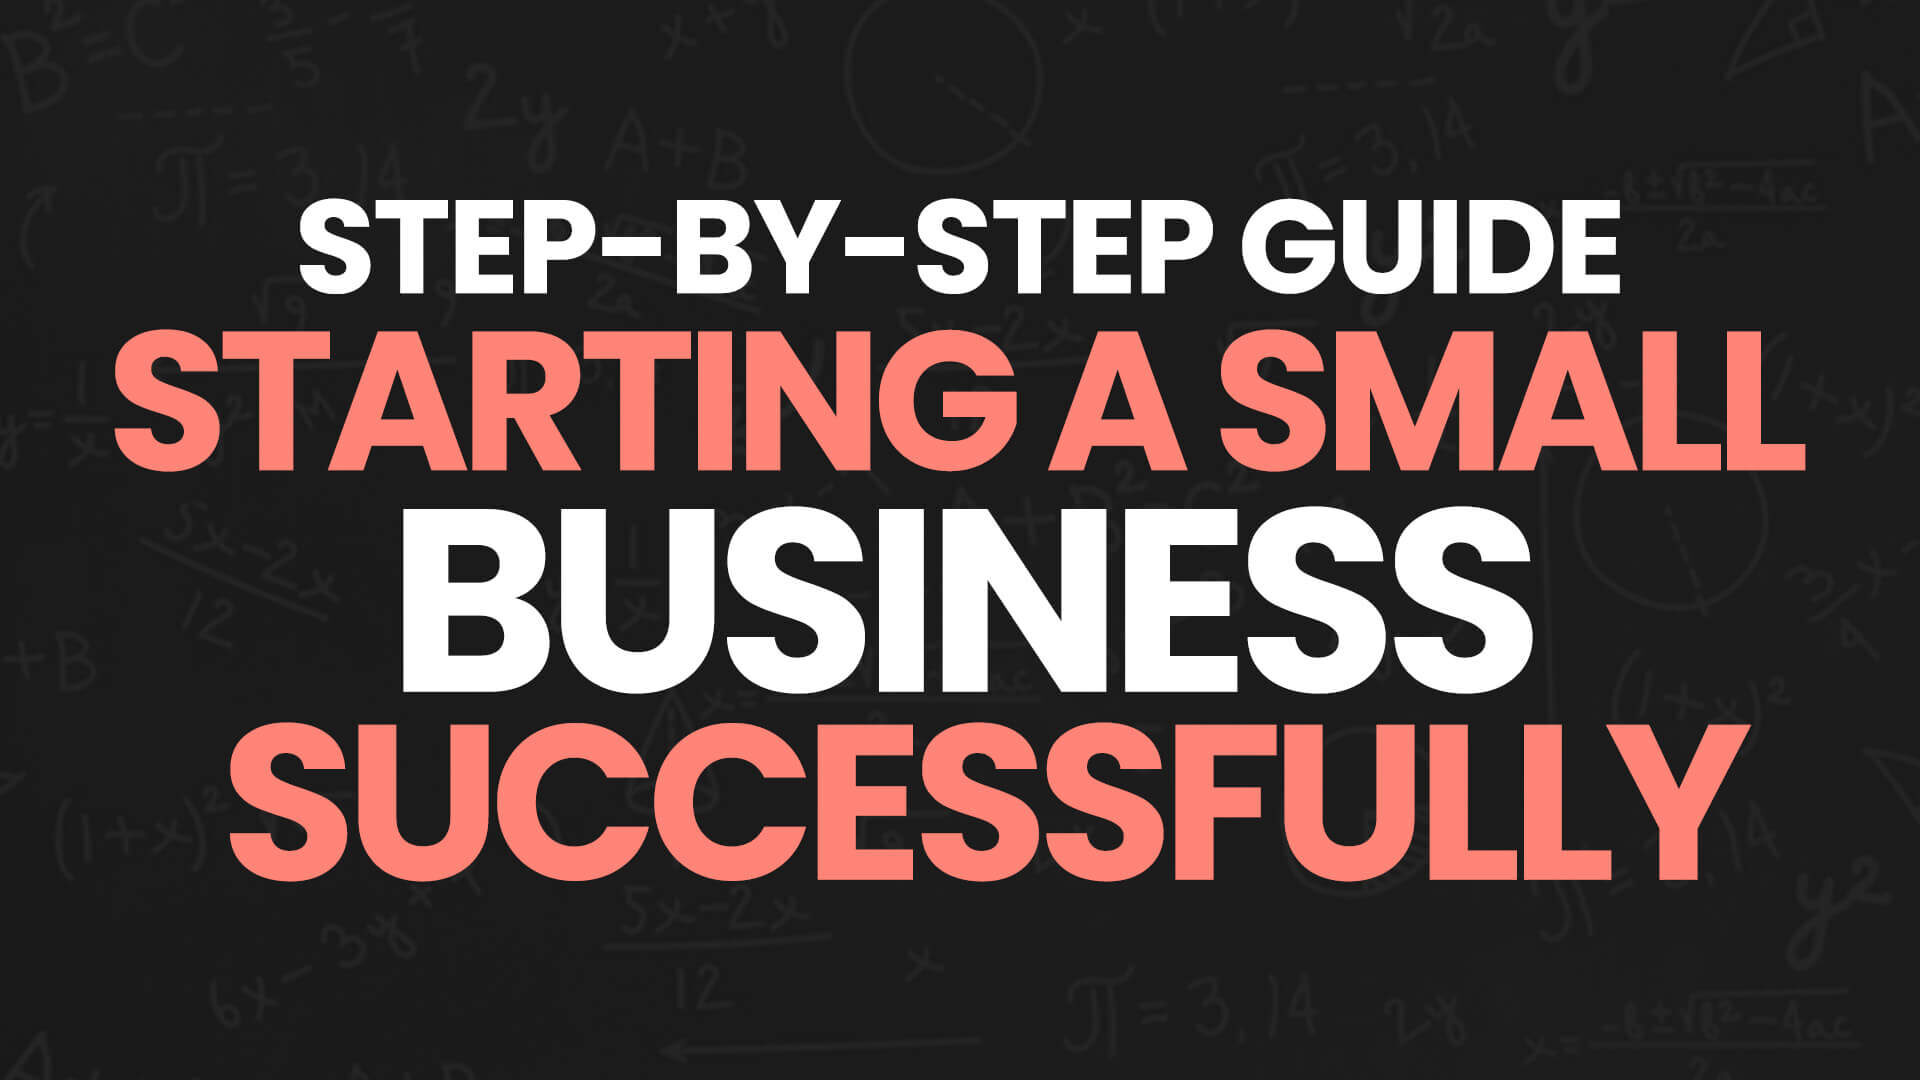 Starting a Small Business Successfully